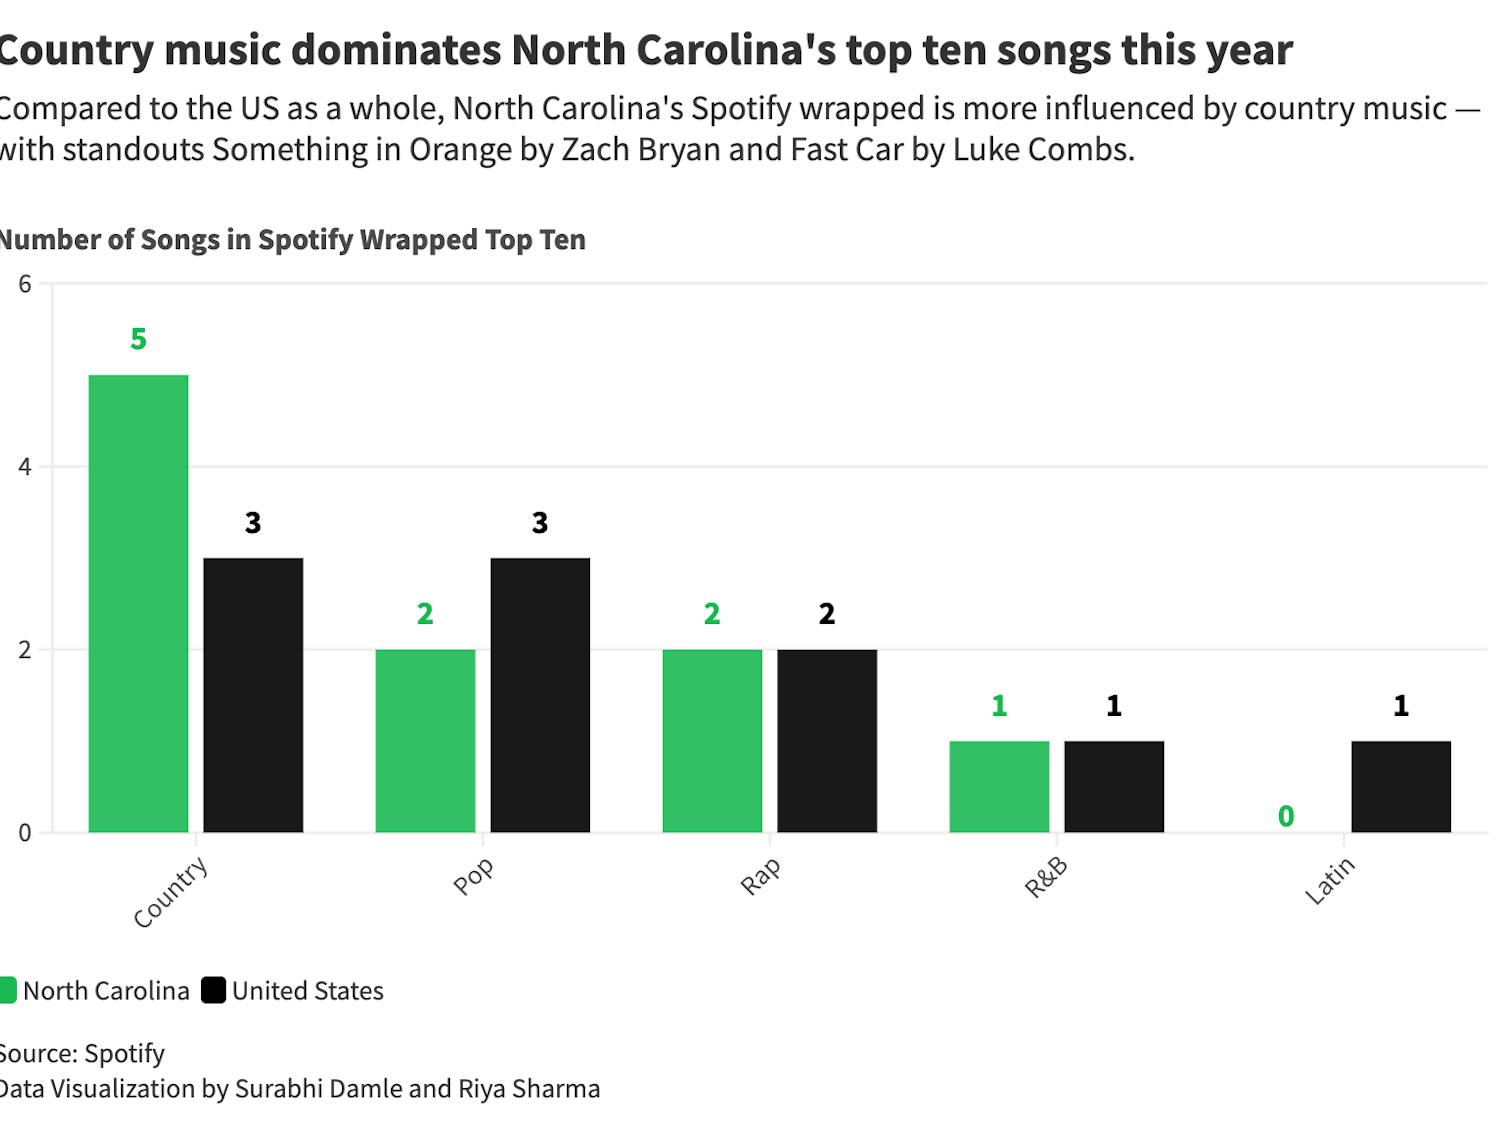 Visualization: Country music dominates North Carolina's top ten songs this year